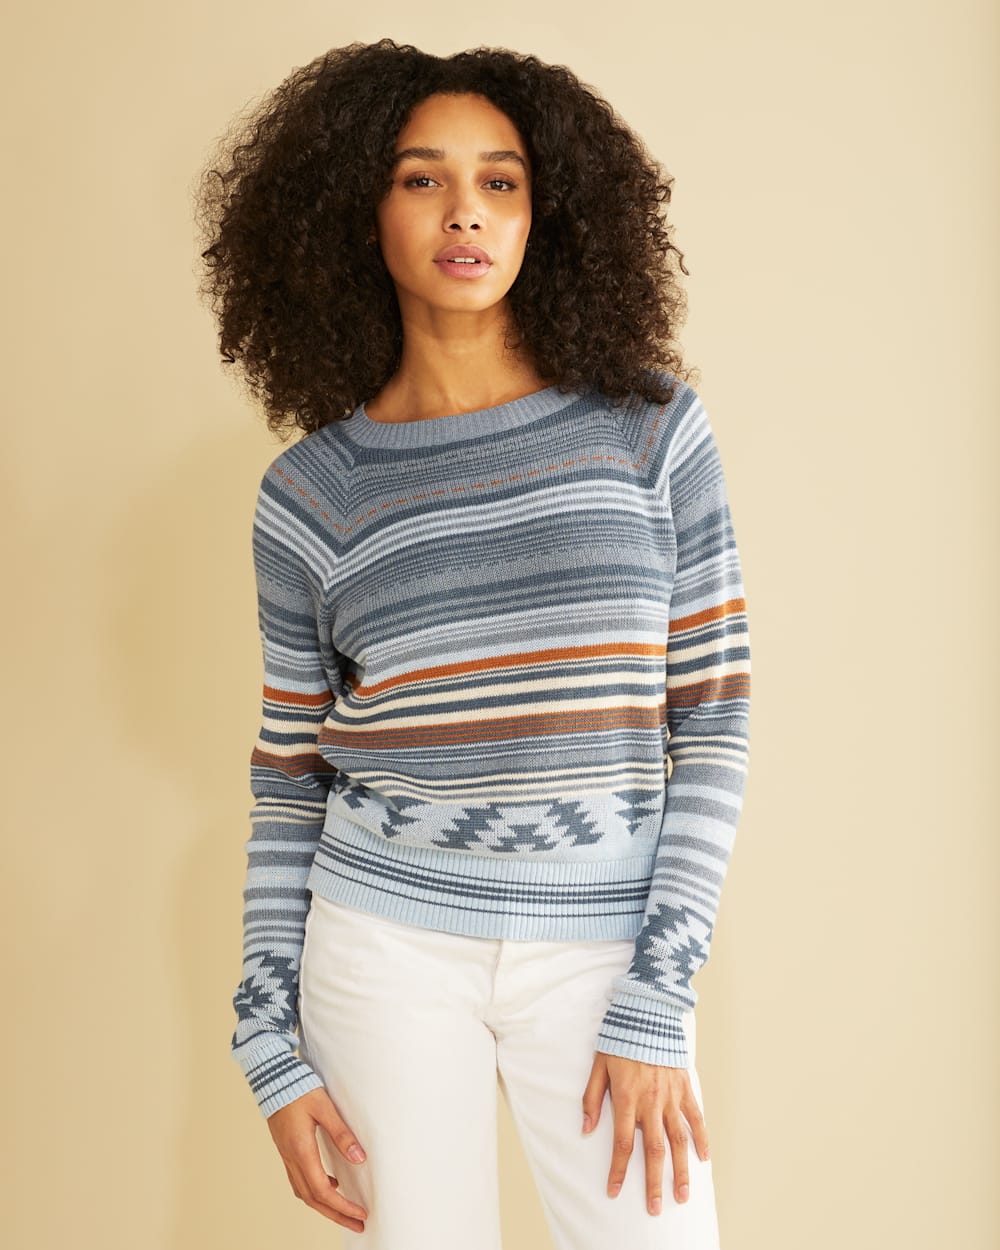 ALTERNATE VIEW OF WOMEN'S RAGLAN COTTON GRAPHIC SWEATER IN SKY BLUE MULTI image number 4